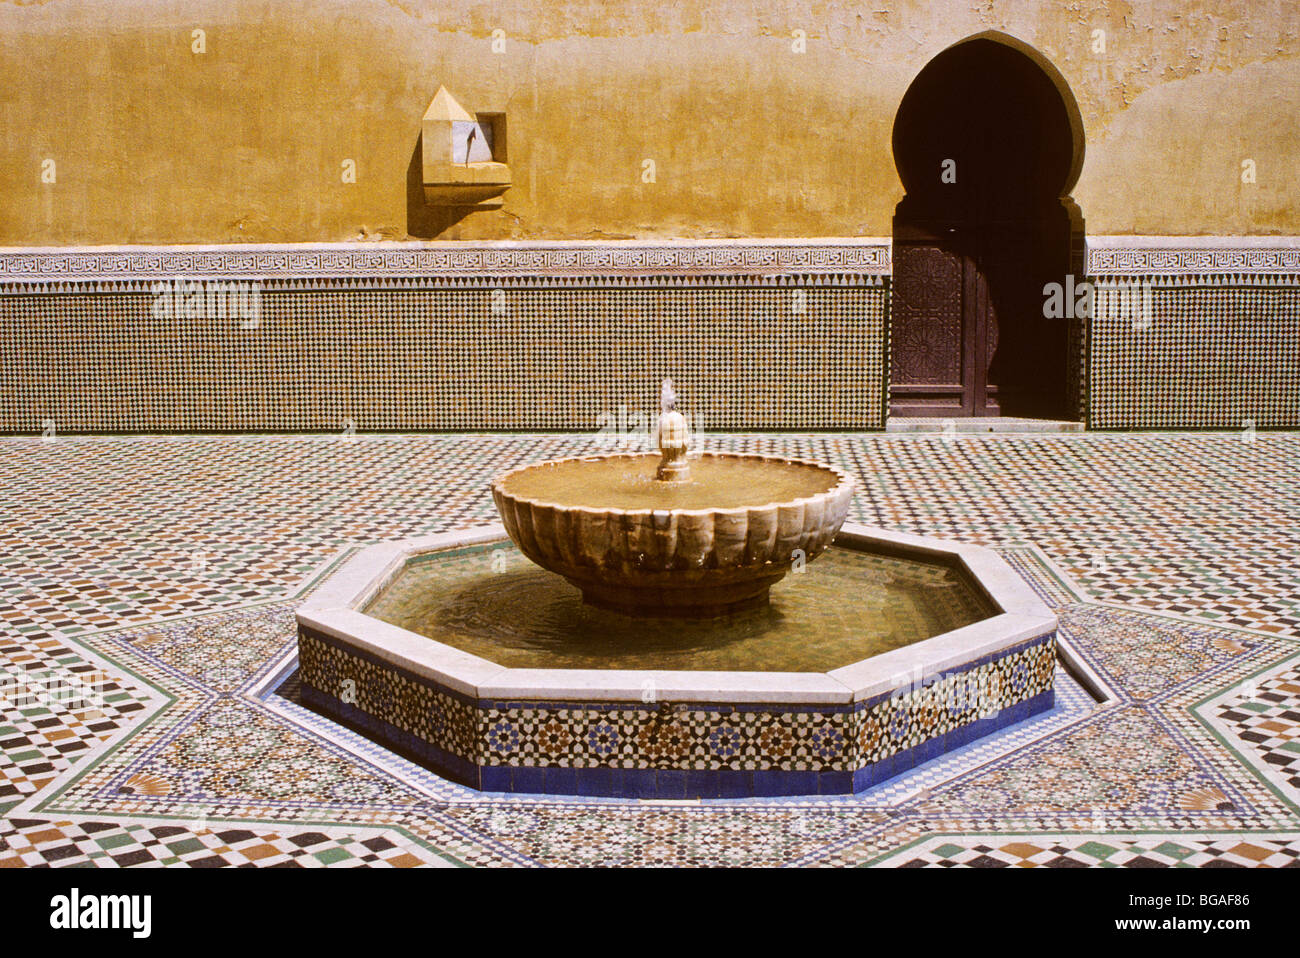 Meknes, Morocco. Courtyard of the Mausoleum of Moulay Ismail, with Sun Dial, Horseshoe Arch Doorway, Fountain. Stock Photo